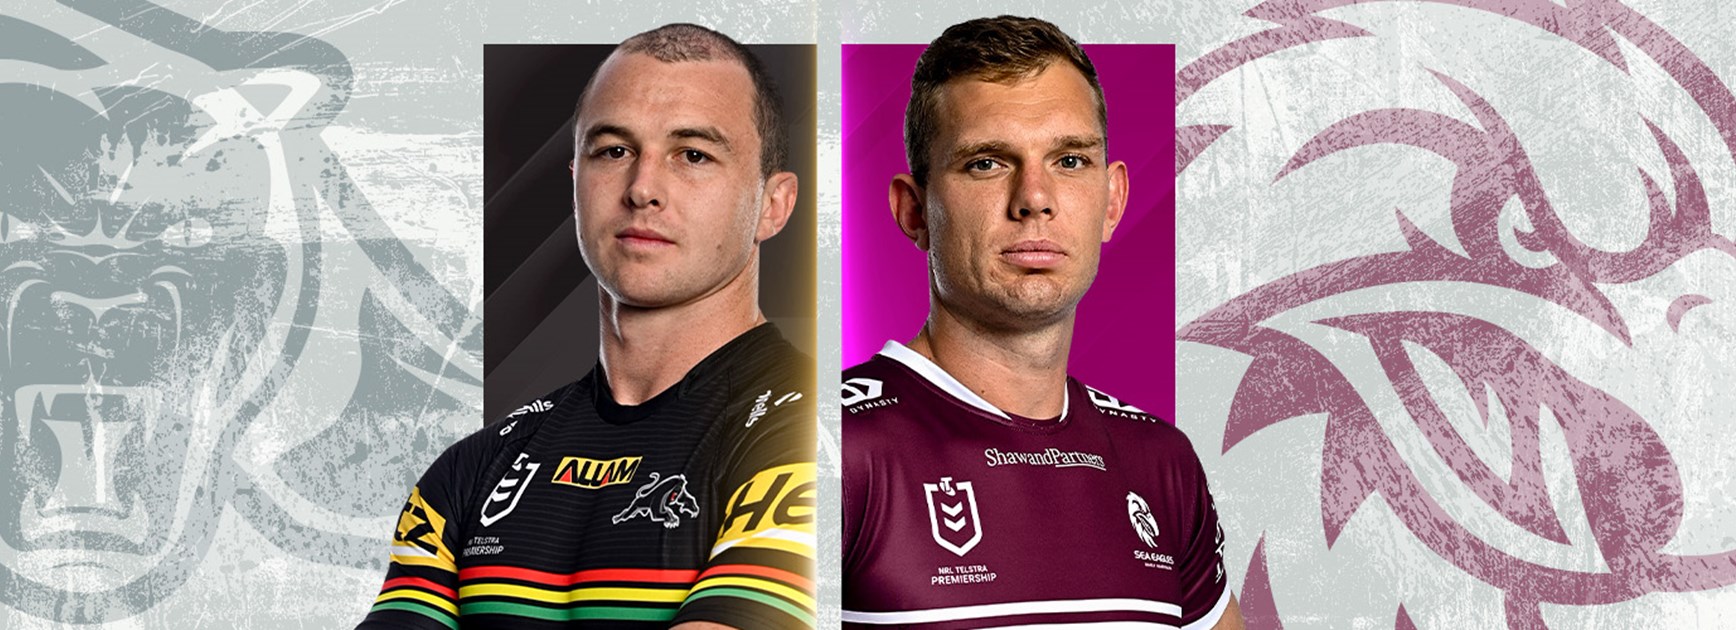 Sea Eagles v Panthers: DCE to break record; Fisher-Harris returns